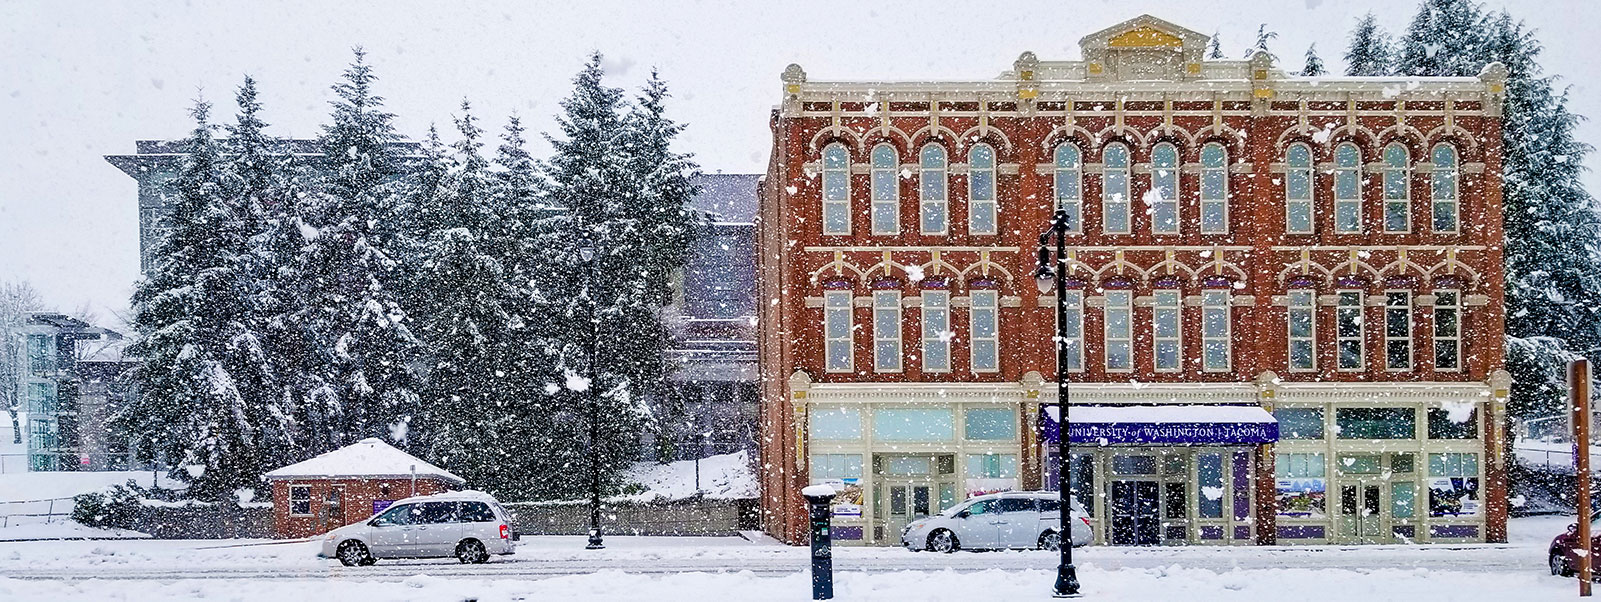 UW Tacoma's Pinkerton building during a snowstorm.